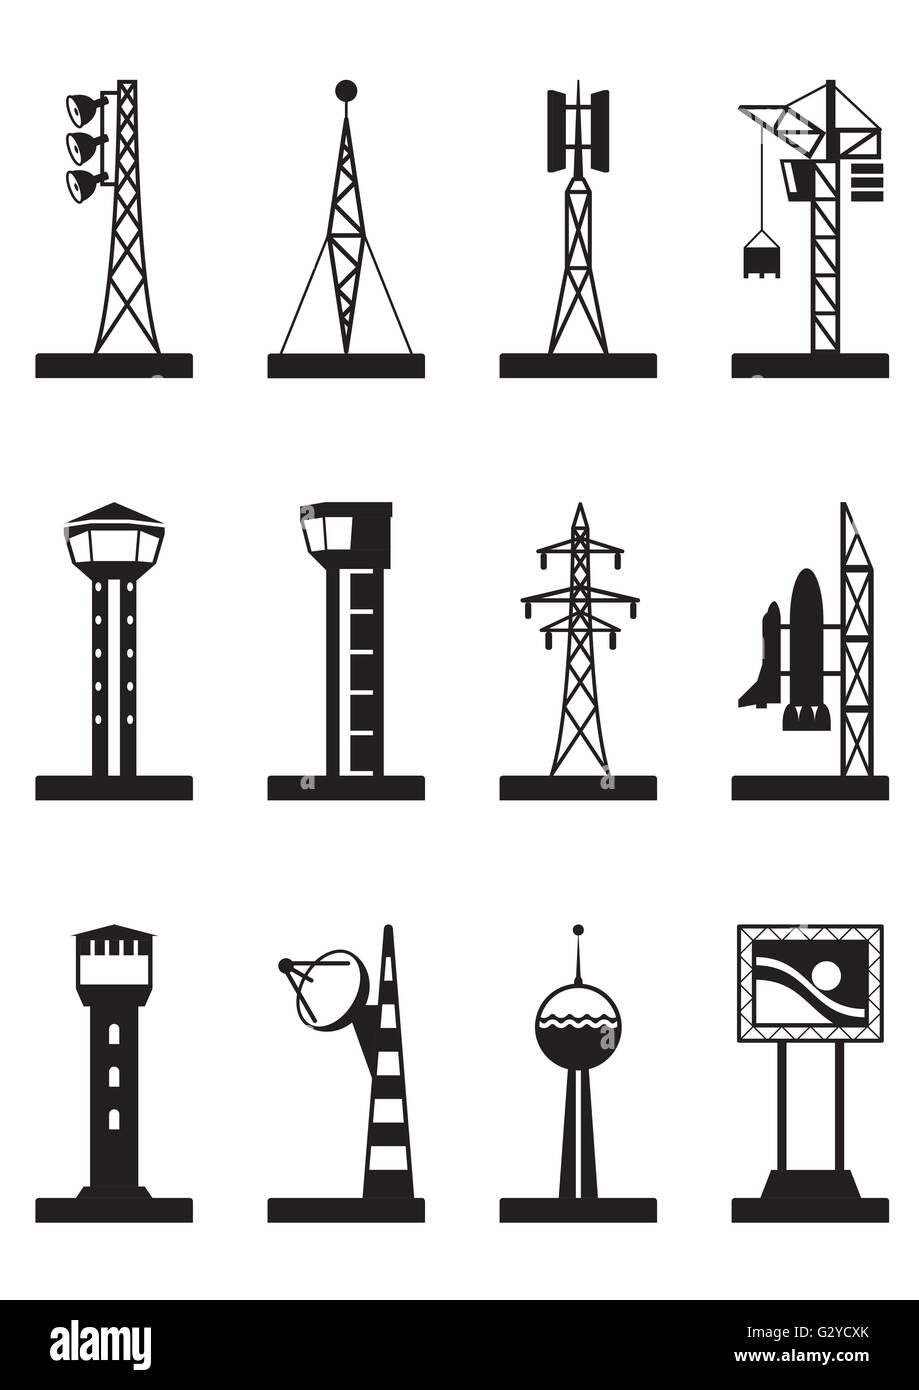 Industrial towers and poles - vector illustration Stock Vector